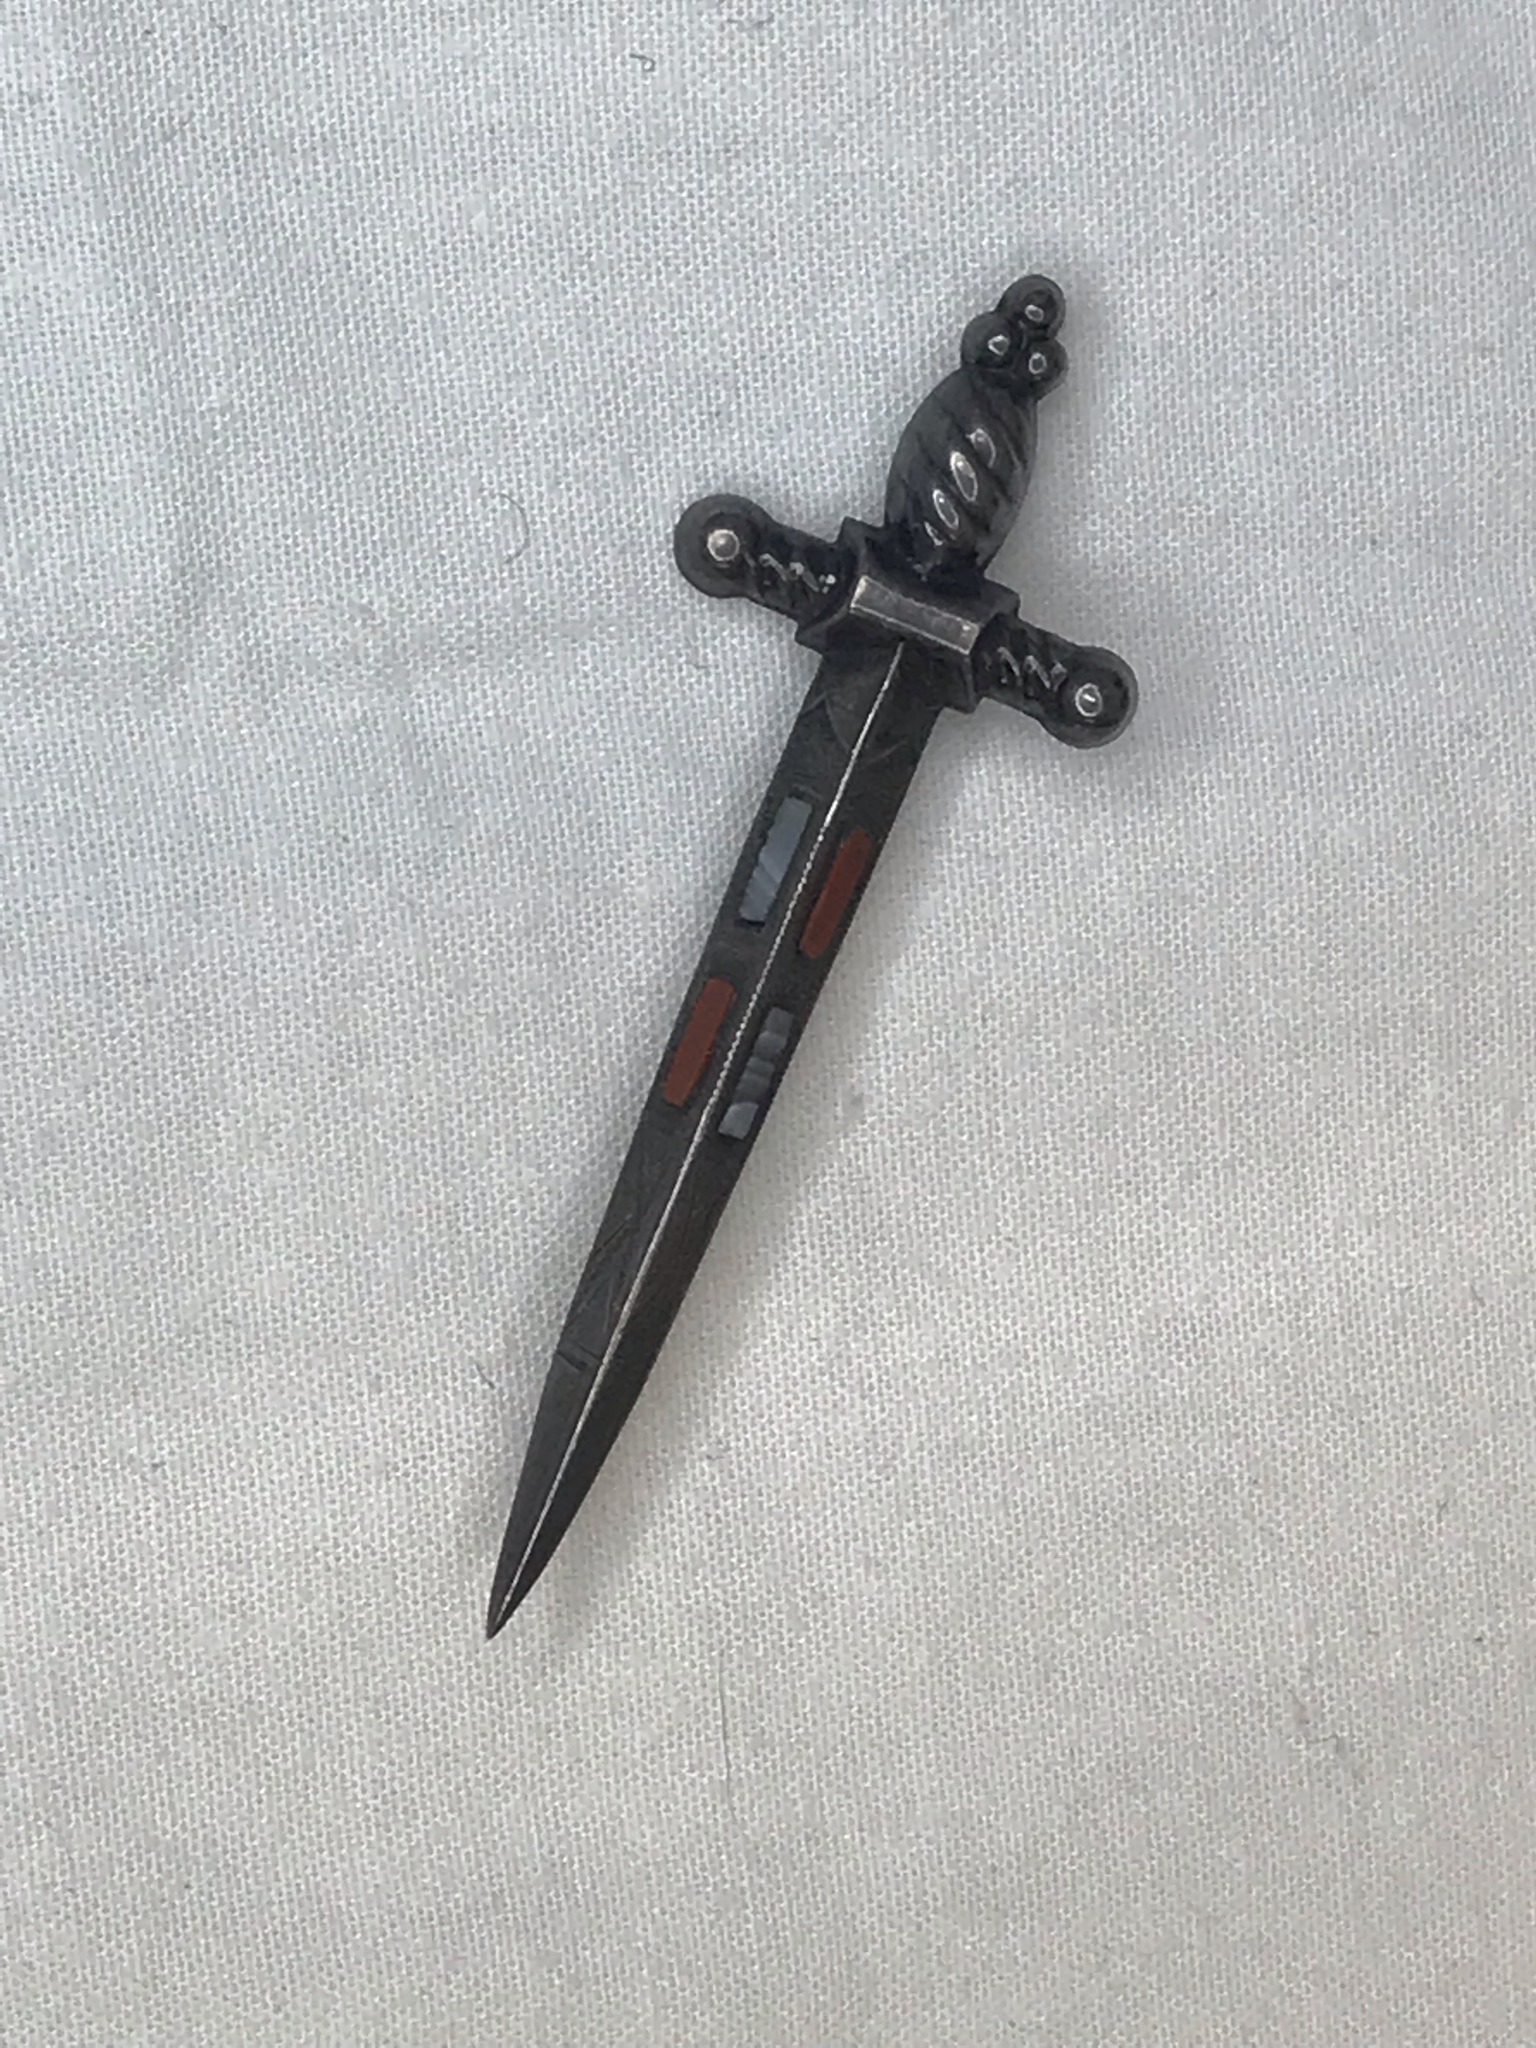 Vintage Scottish Engraved and Agate Sword Pin Broach - Treasure Antique ...